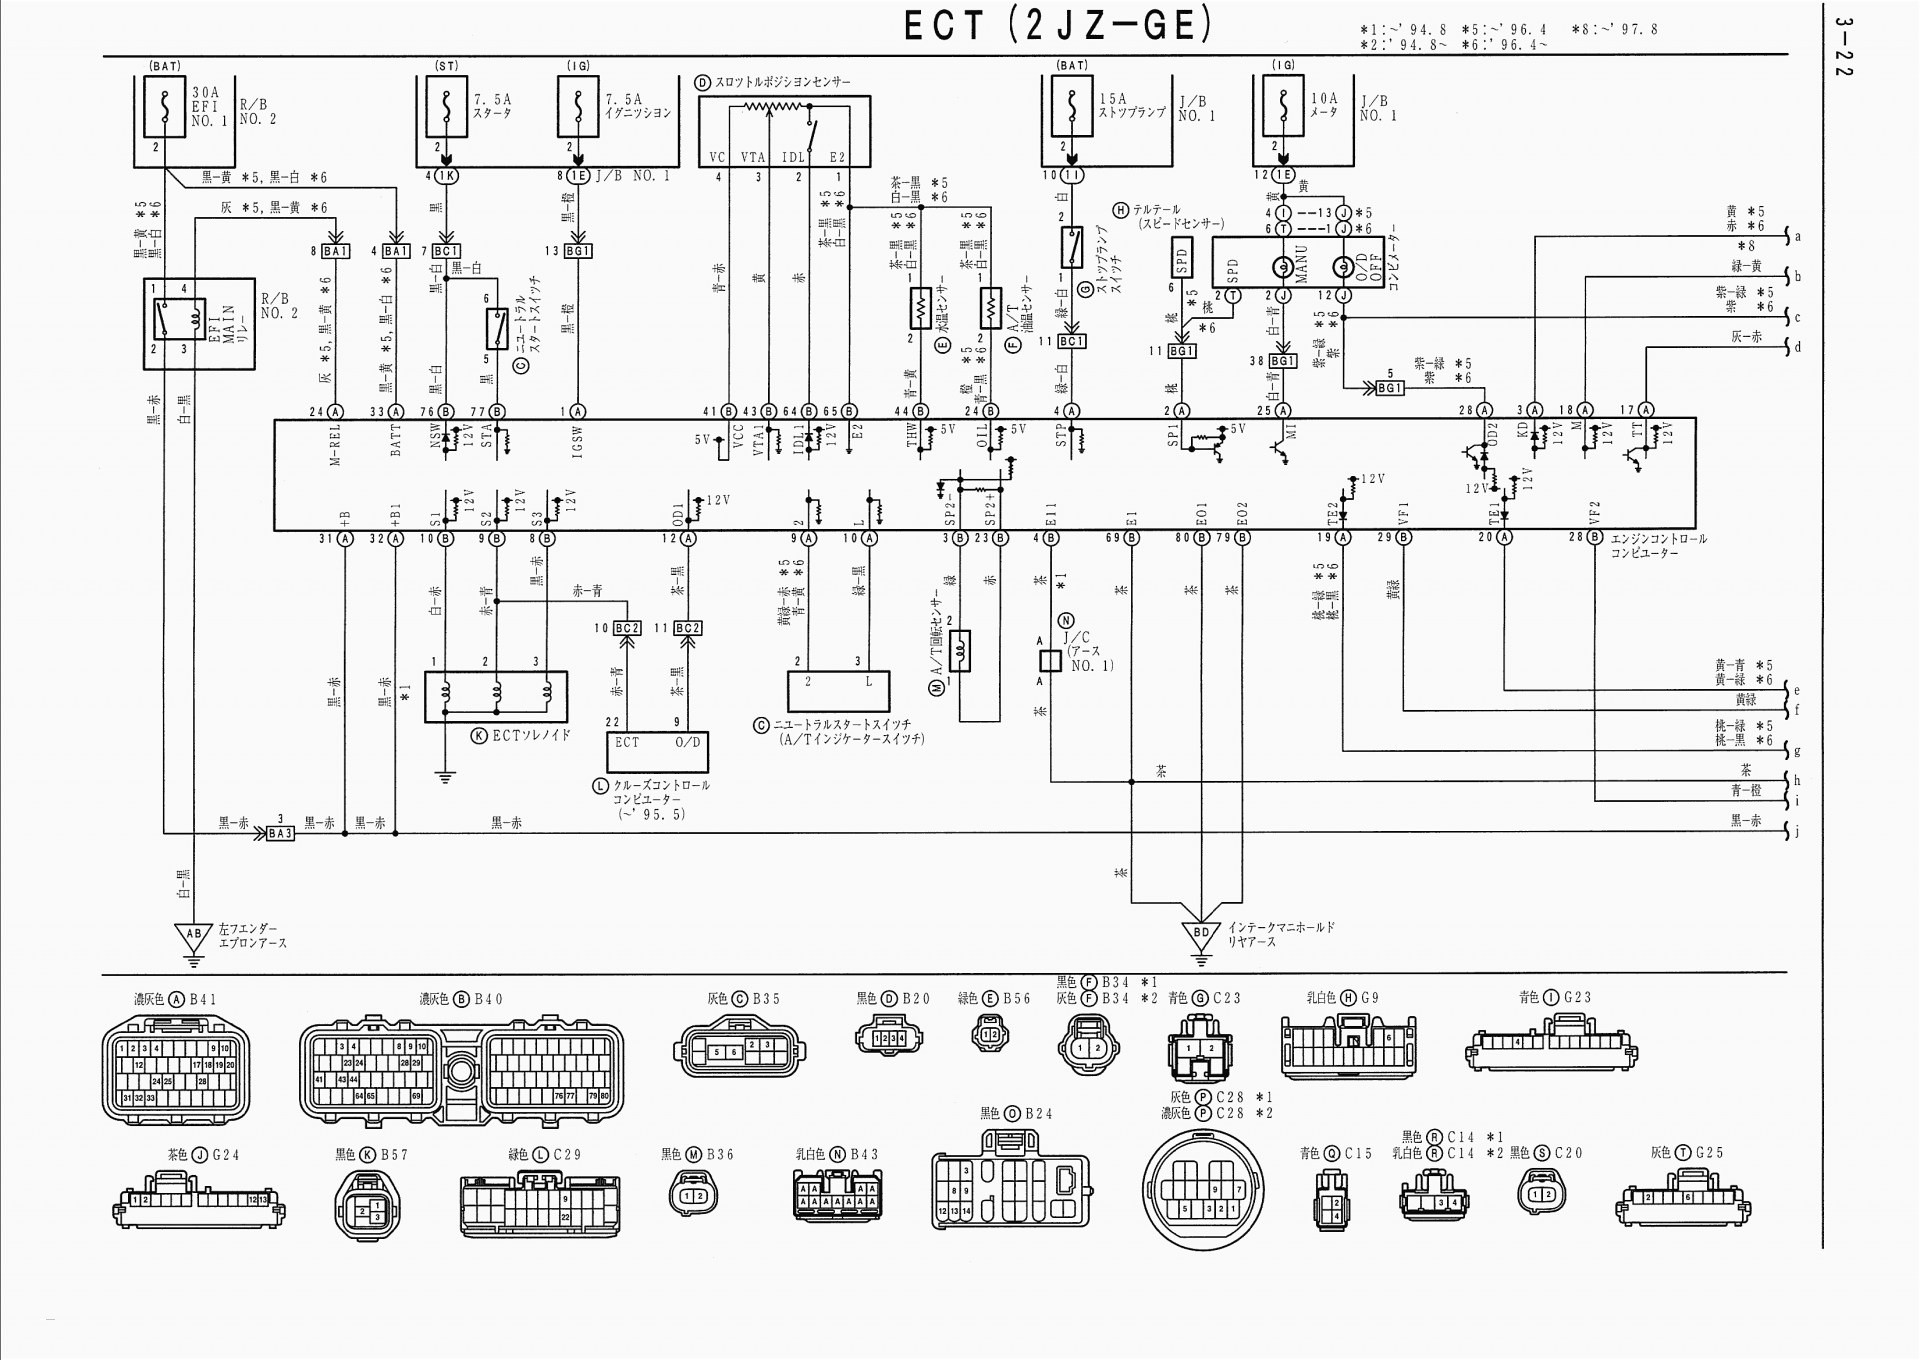 Electrical Engineering Diagram A Wiring Diagram New Electrical Diagram Newest Cooker Wiring Diagram Of Electrical Engineering Diagram